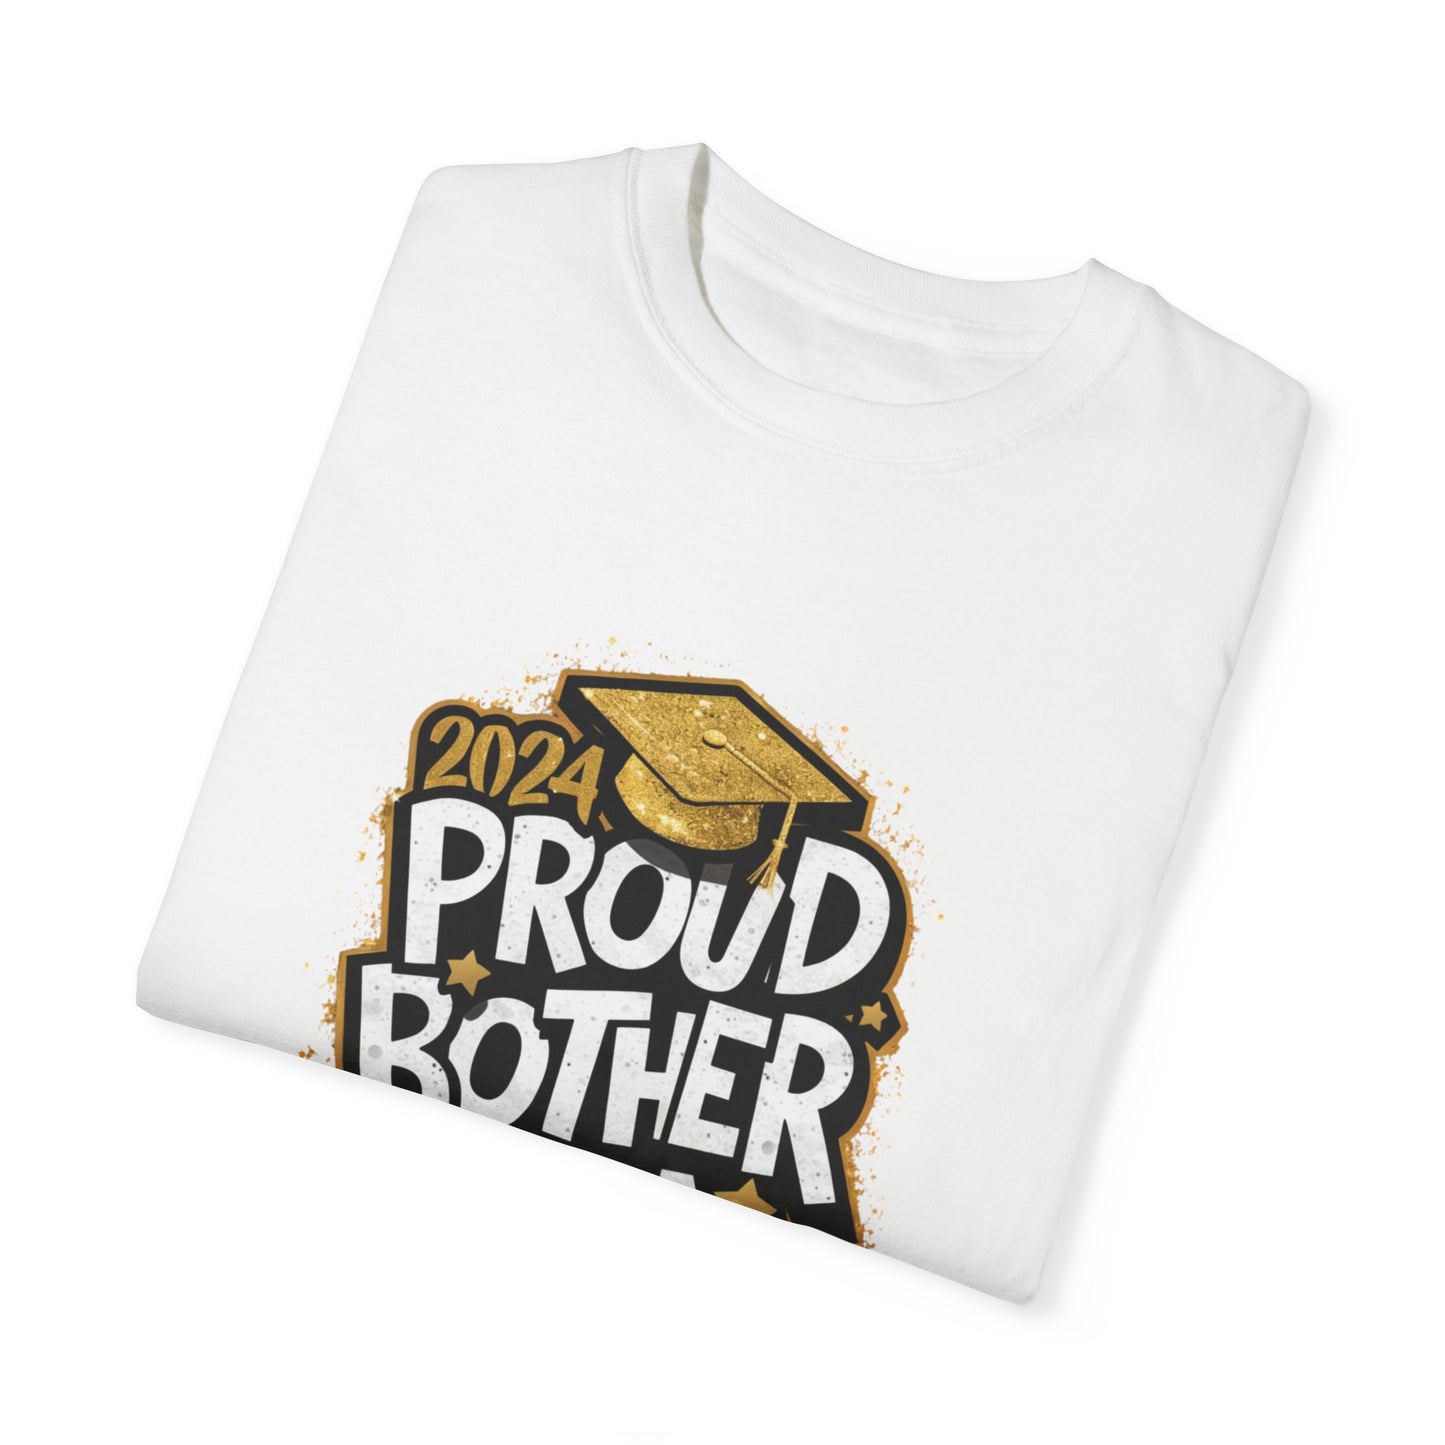 Proud Brother of a 2024 Graduate Unisex Garment-dyed T-shirt Cotton Funny Humorous Graphic Soft Premium Unisex Men Women White T-shirt Birthday Gift-23